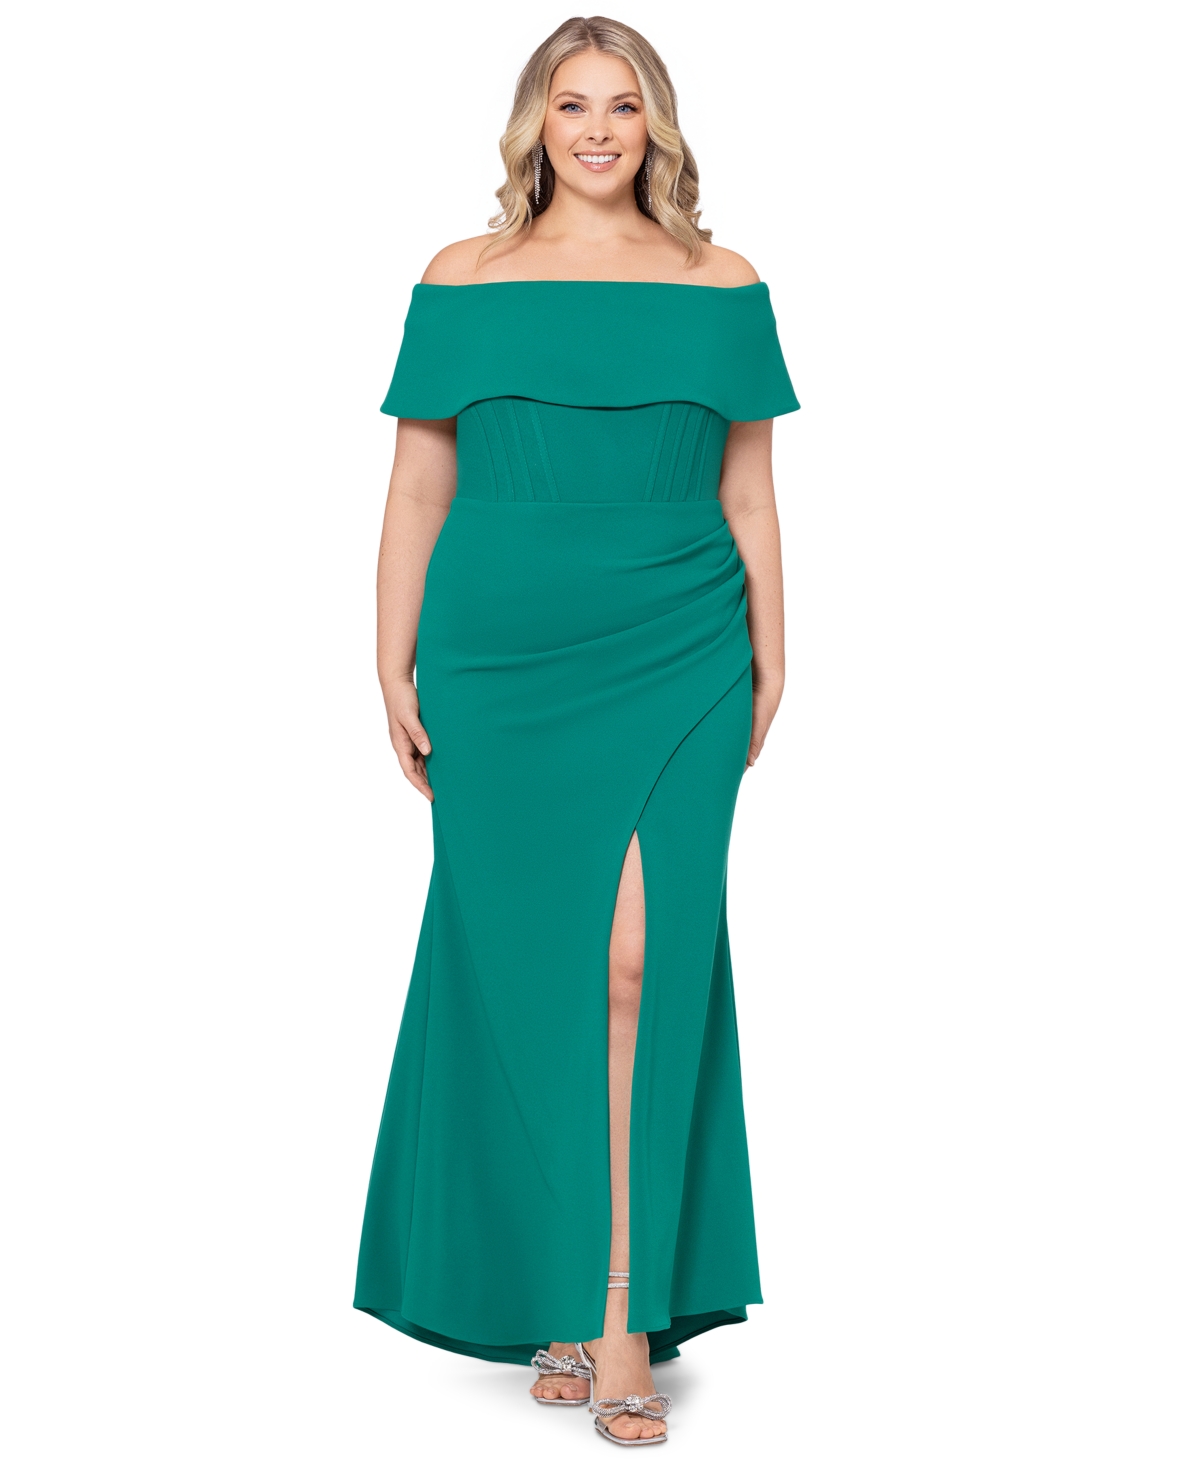 Plus Size Corset Off-The-Shoulder Gown - Green